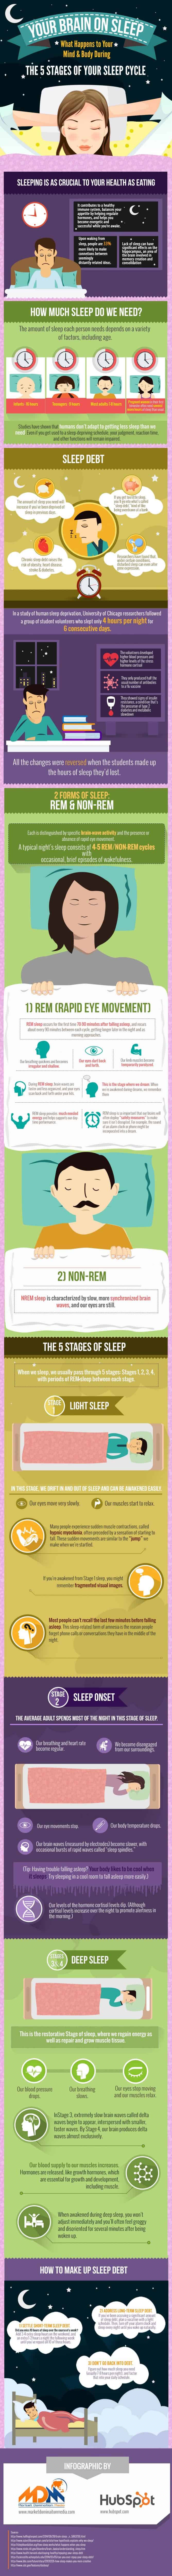 infographic on how much sleep you need to remain healthy